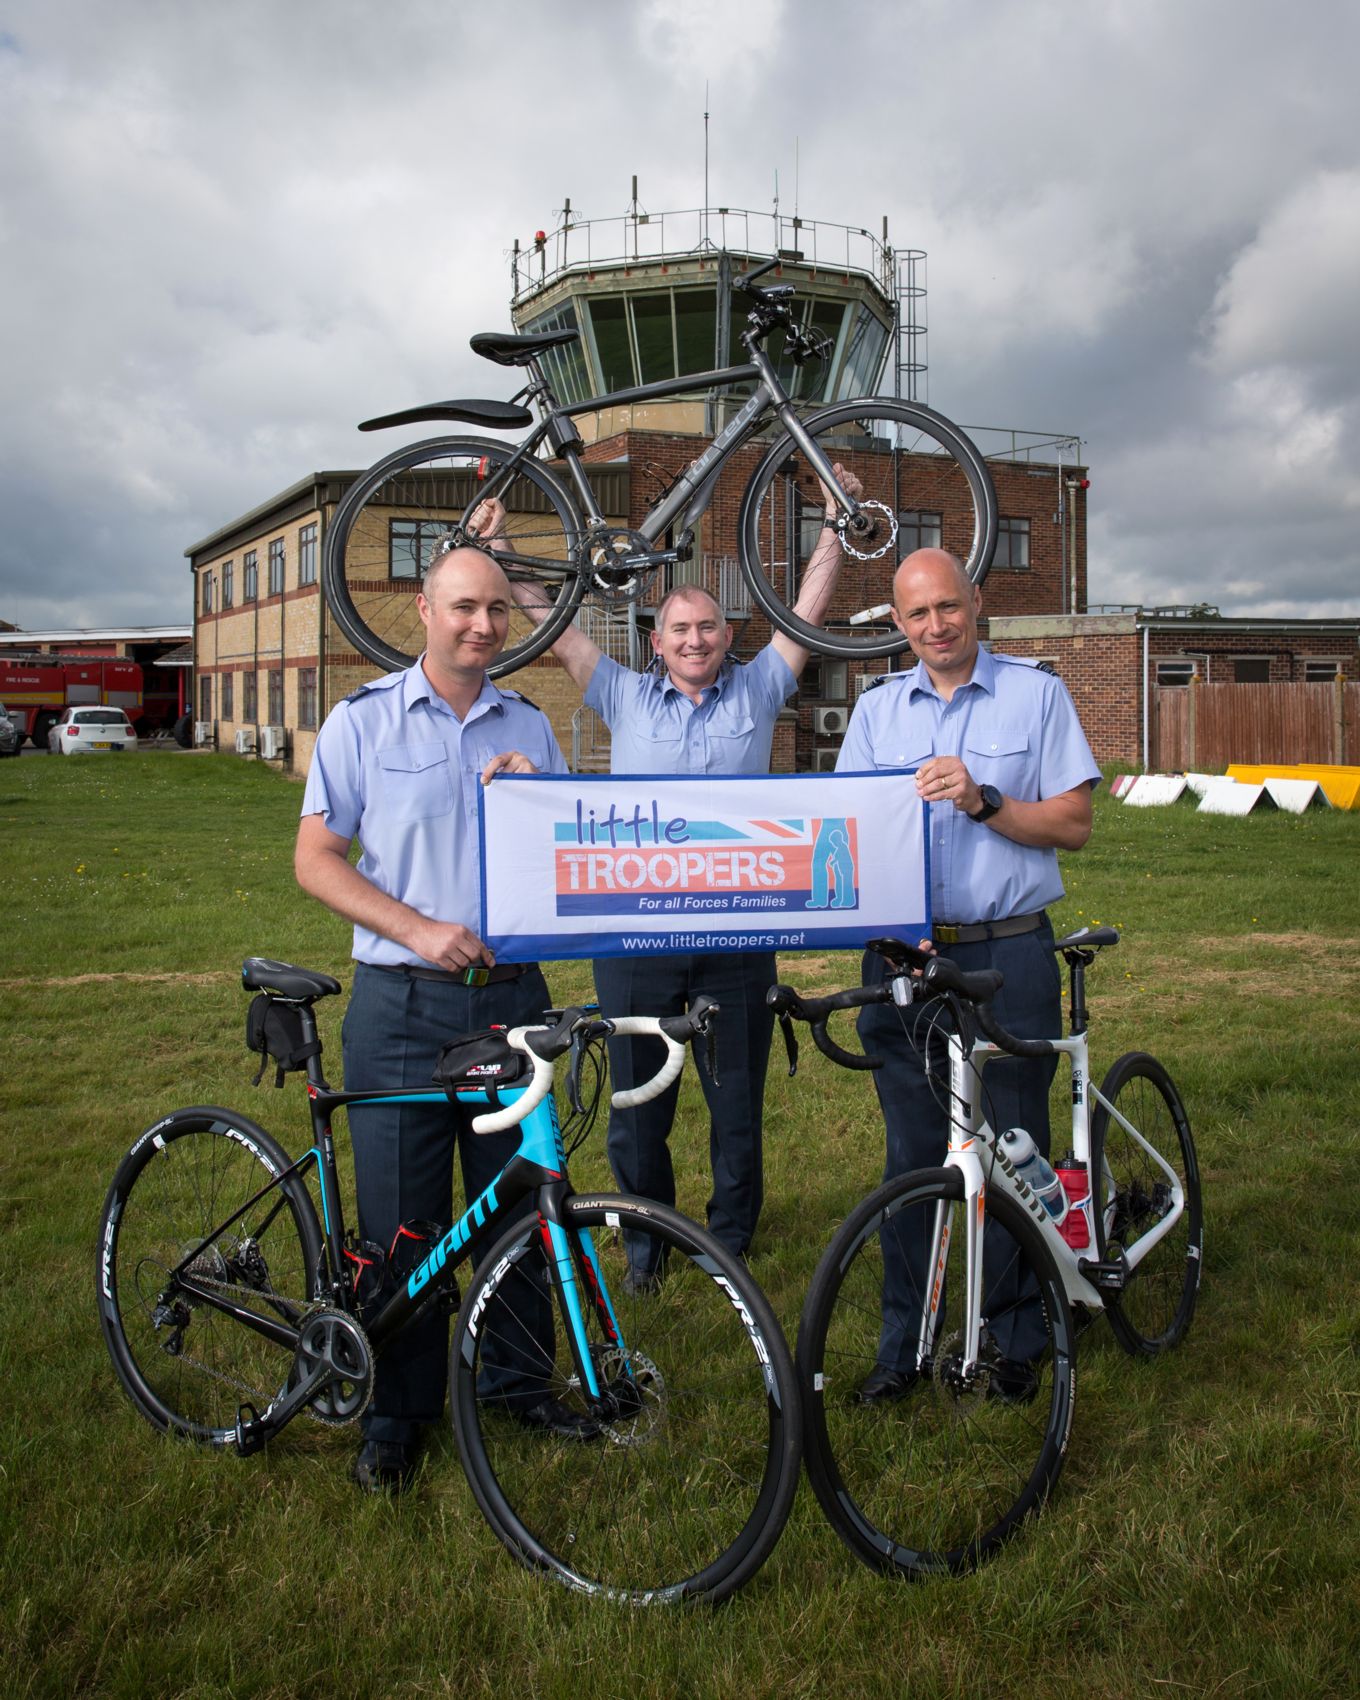 The three Air Traffic Controllers pose with their bikes at the Control Tower before the expidition